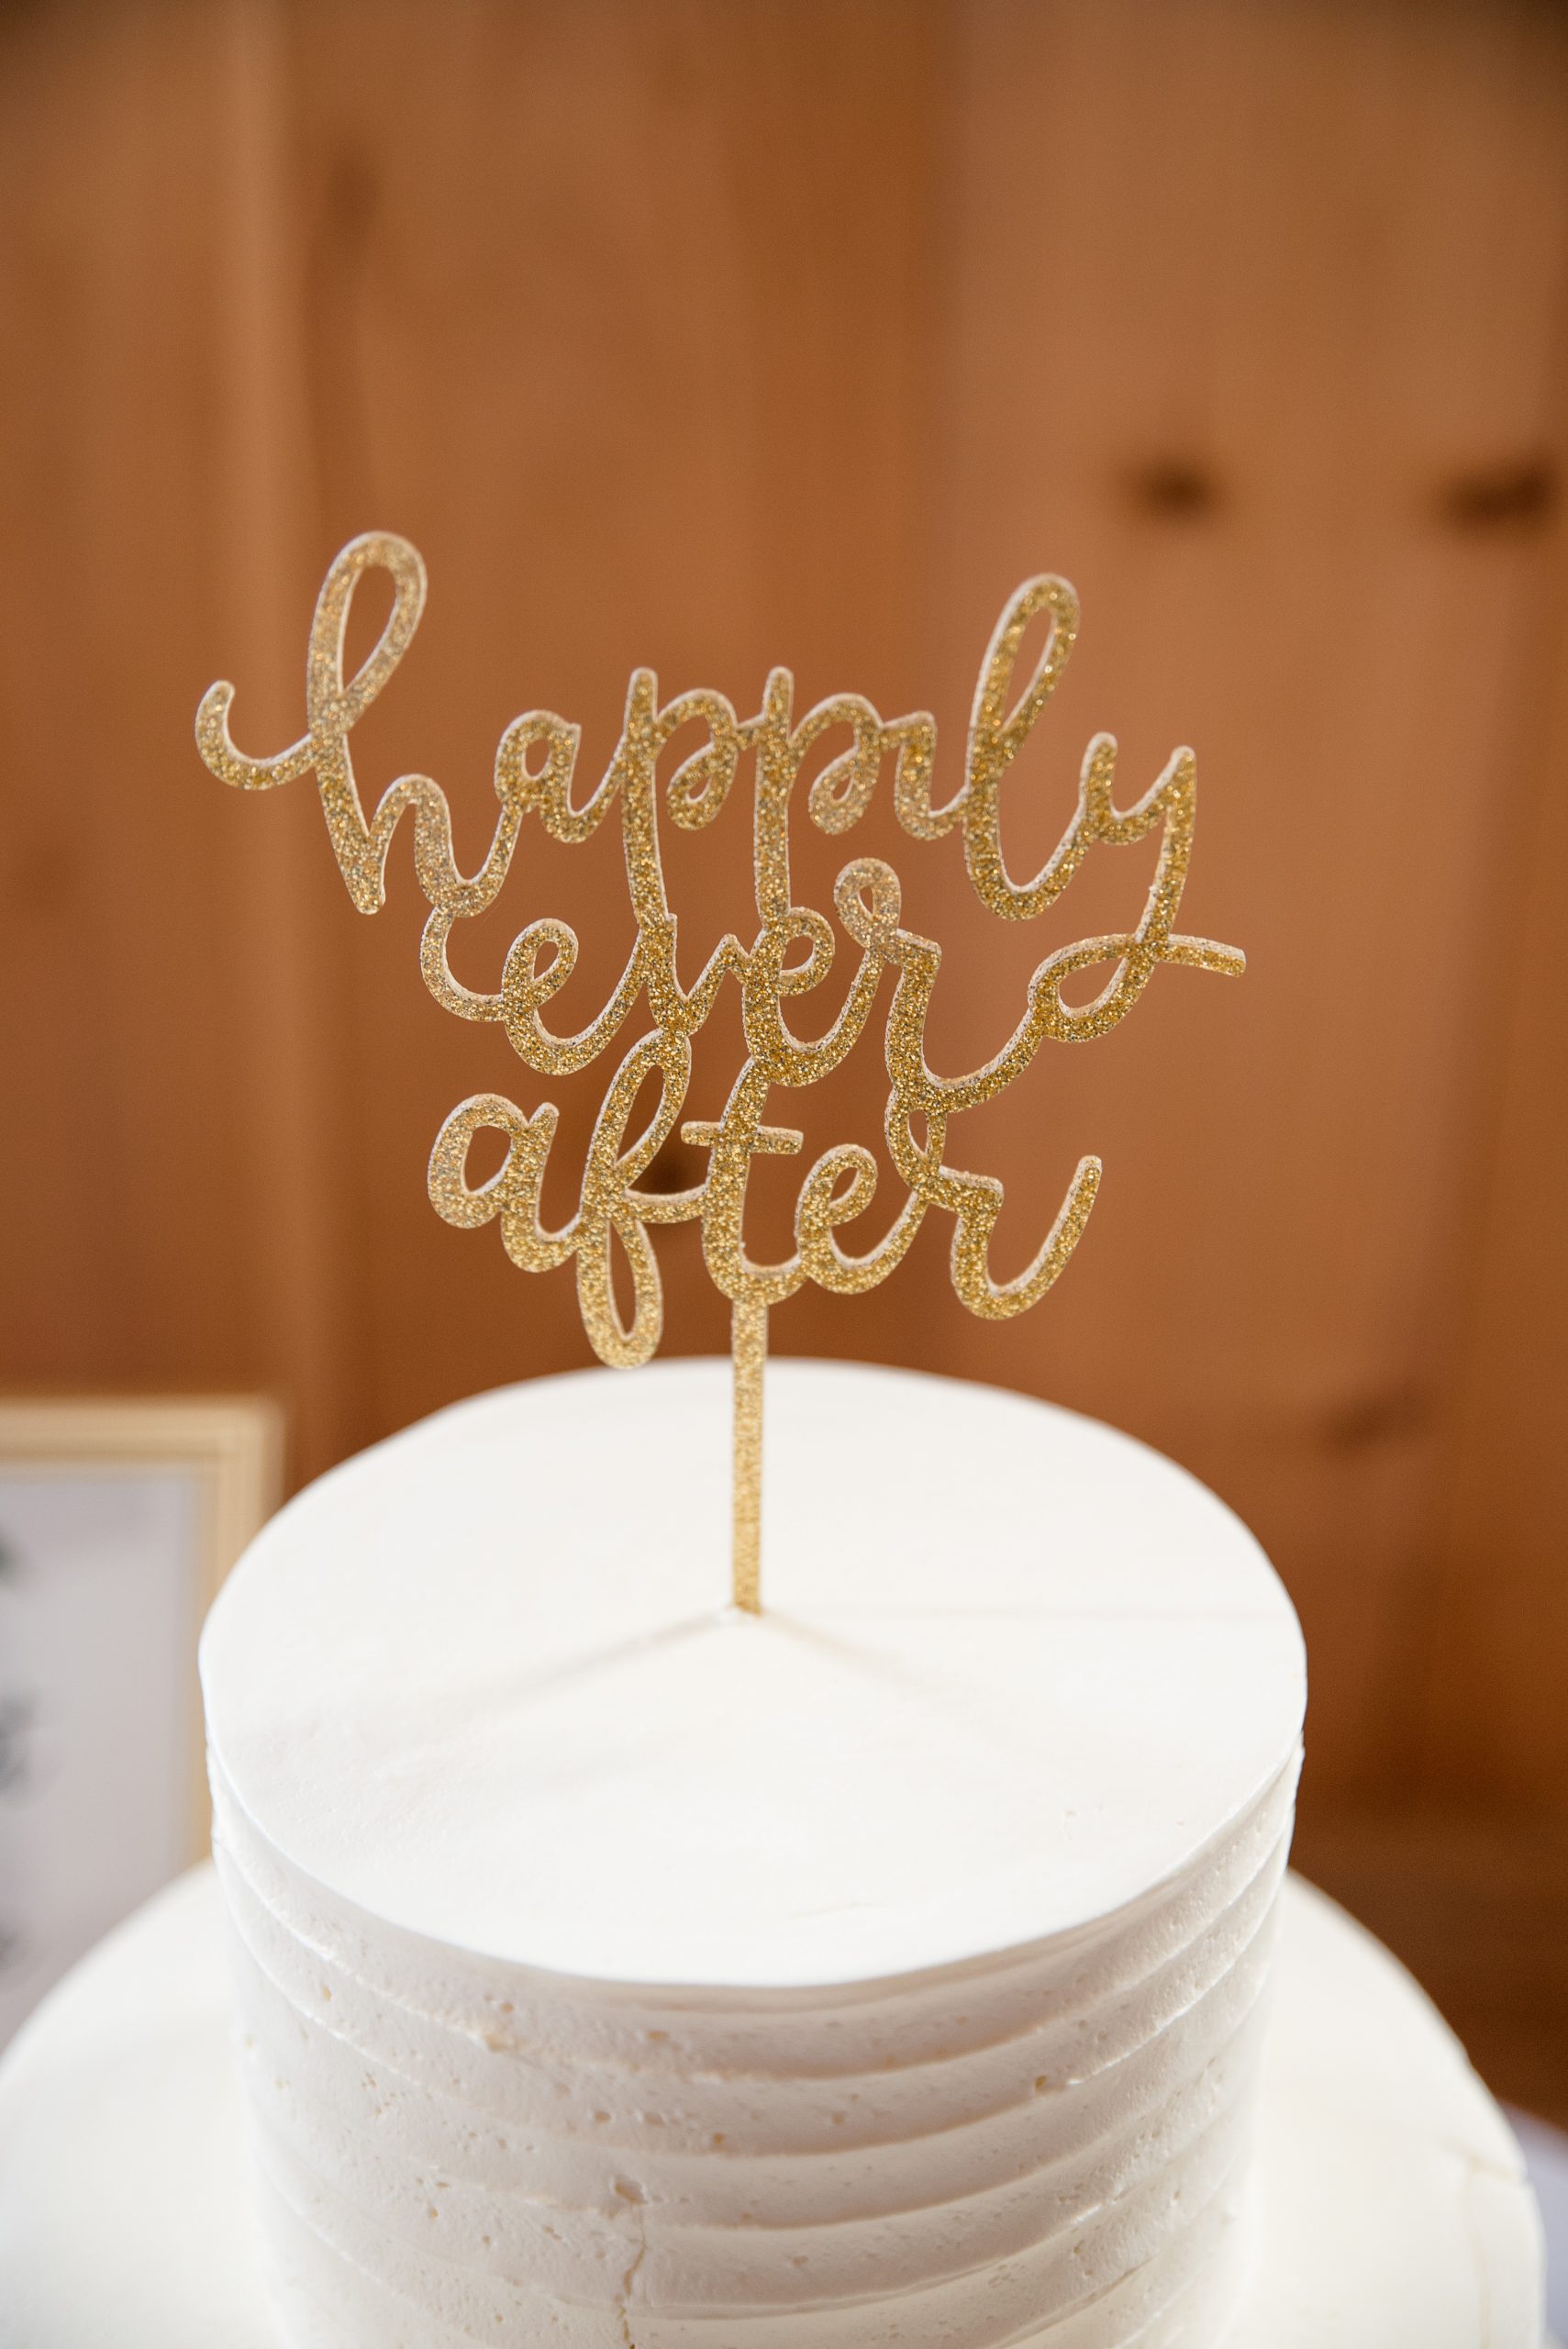 happily ever after cake topper on whie wedding cake